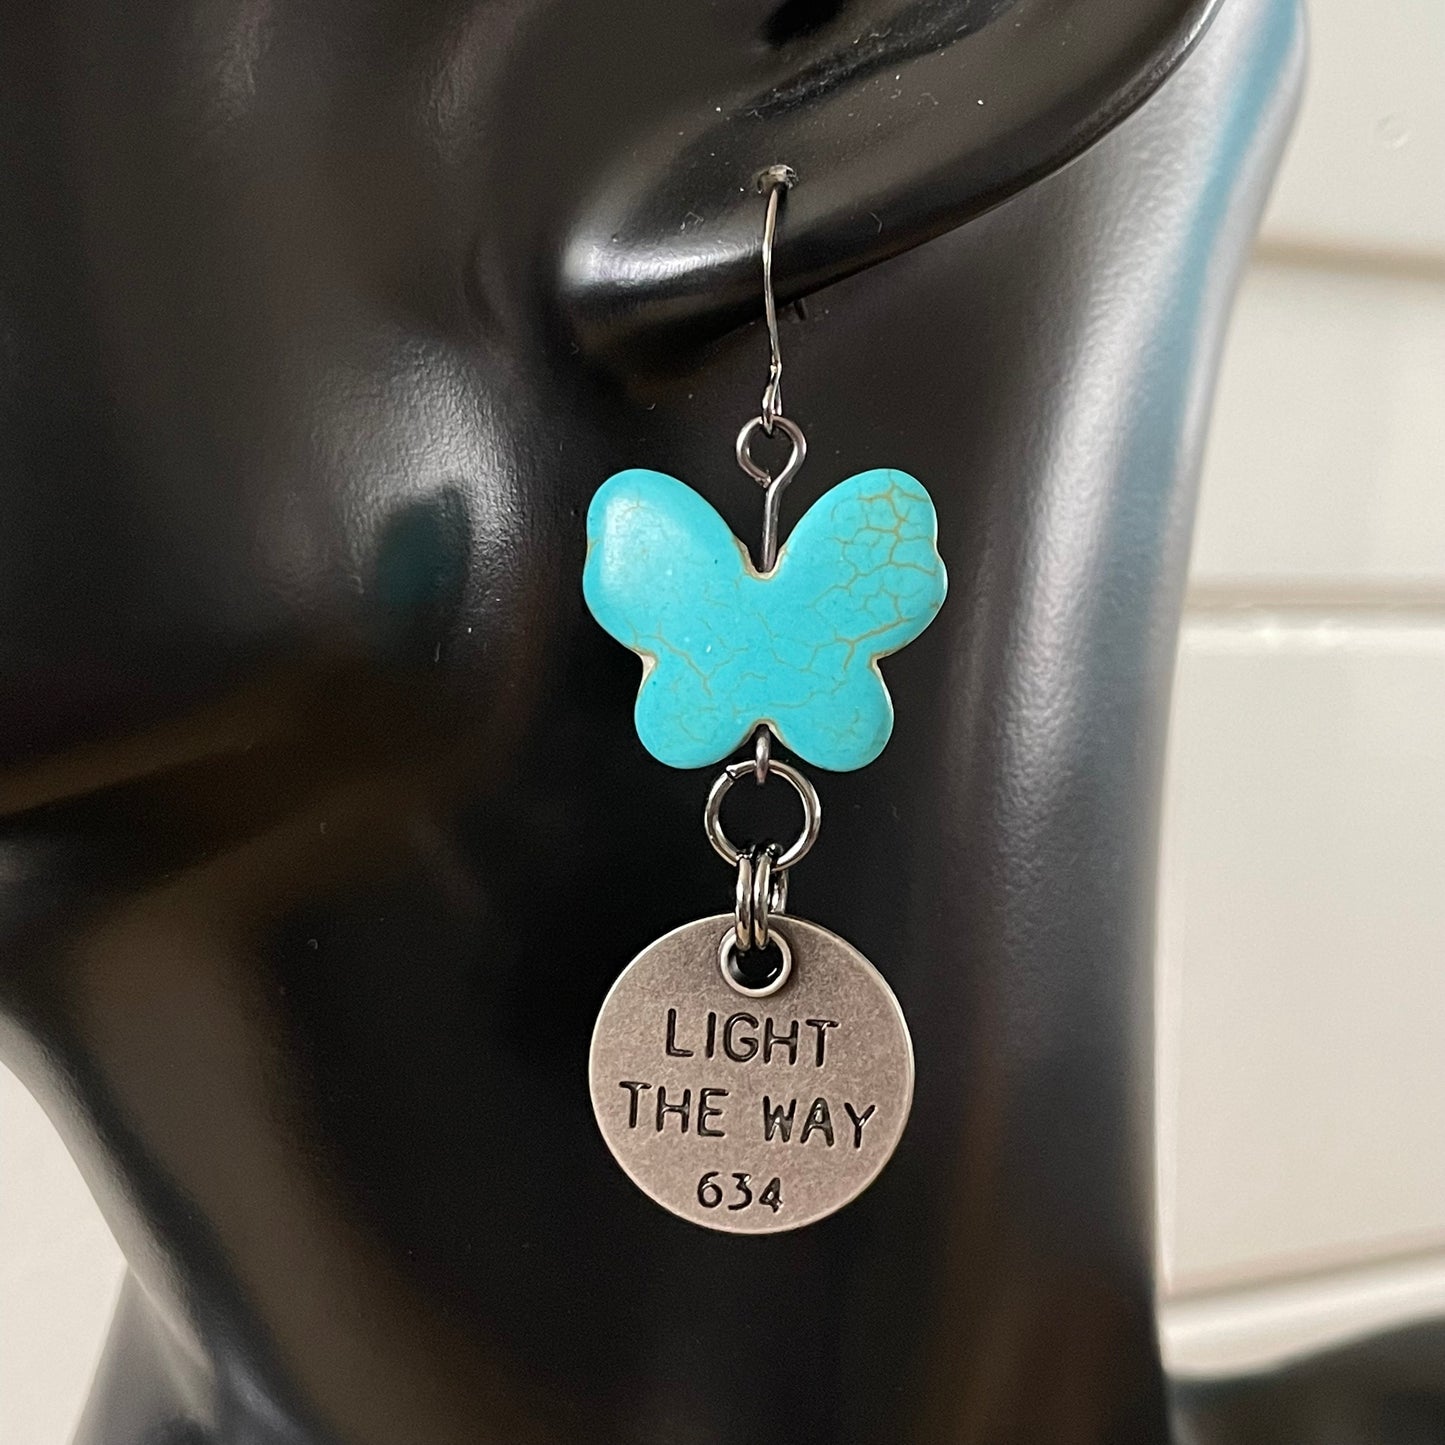 Handmade Blue Marbled Magnesite Butterfly & Motivational Saying Statement Earrings Light Here Now Inspiration Positive